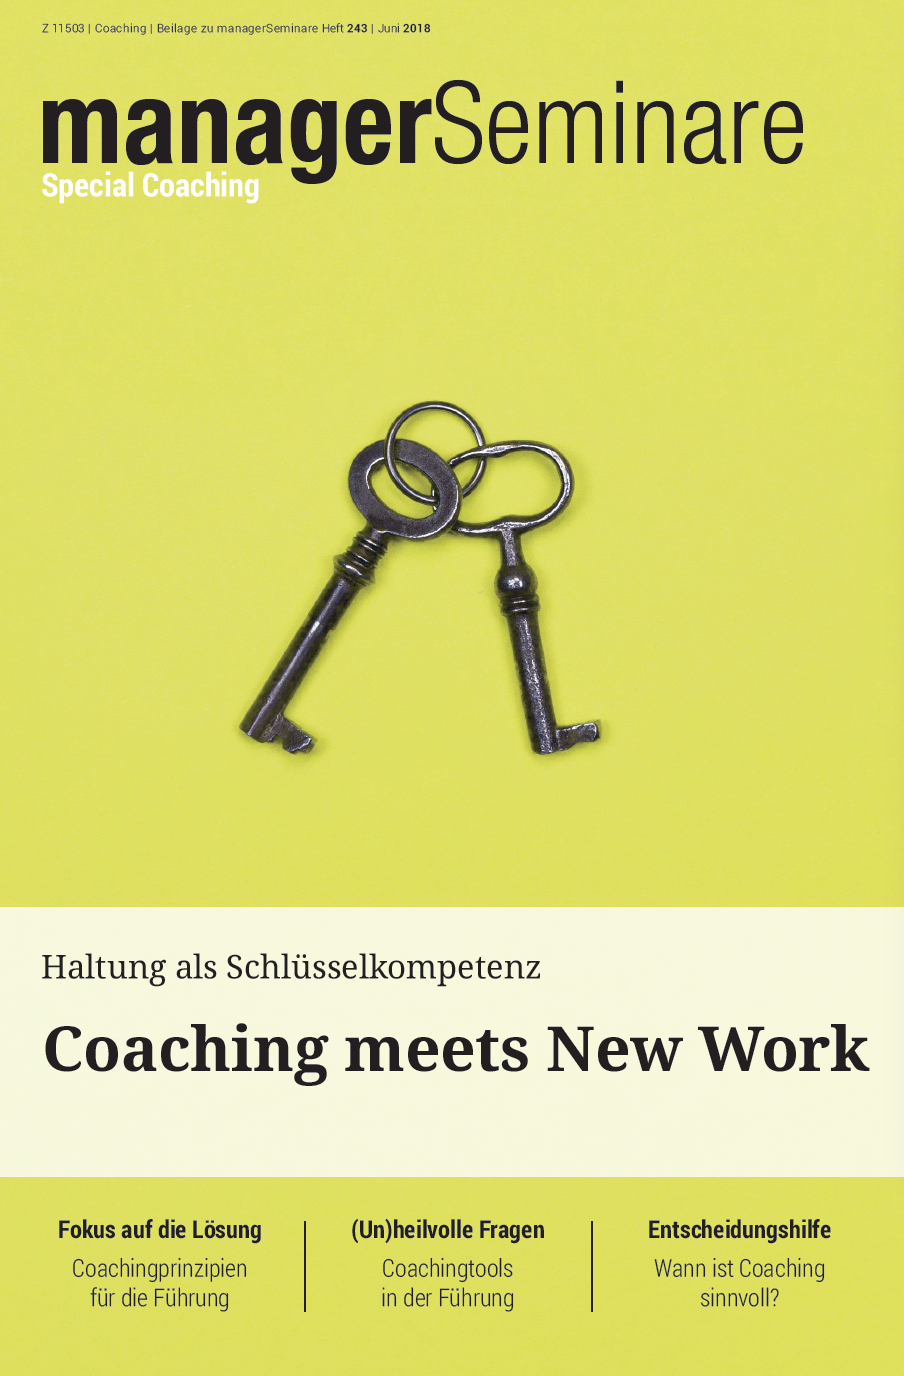 Coaching meets New Work